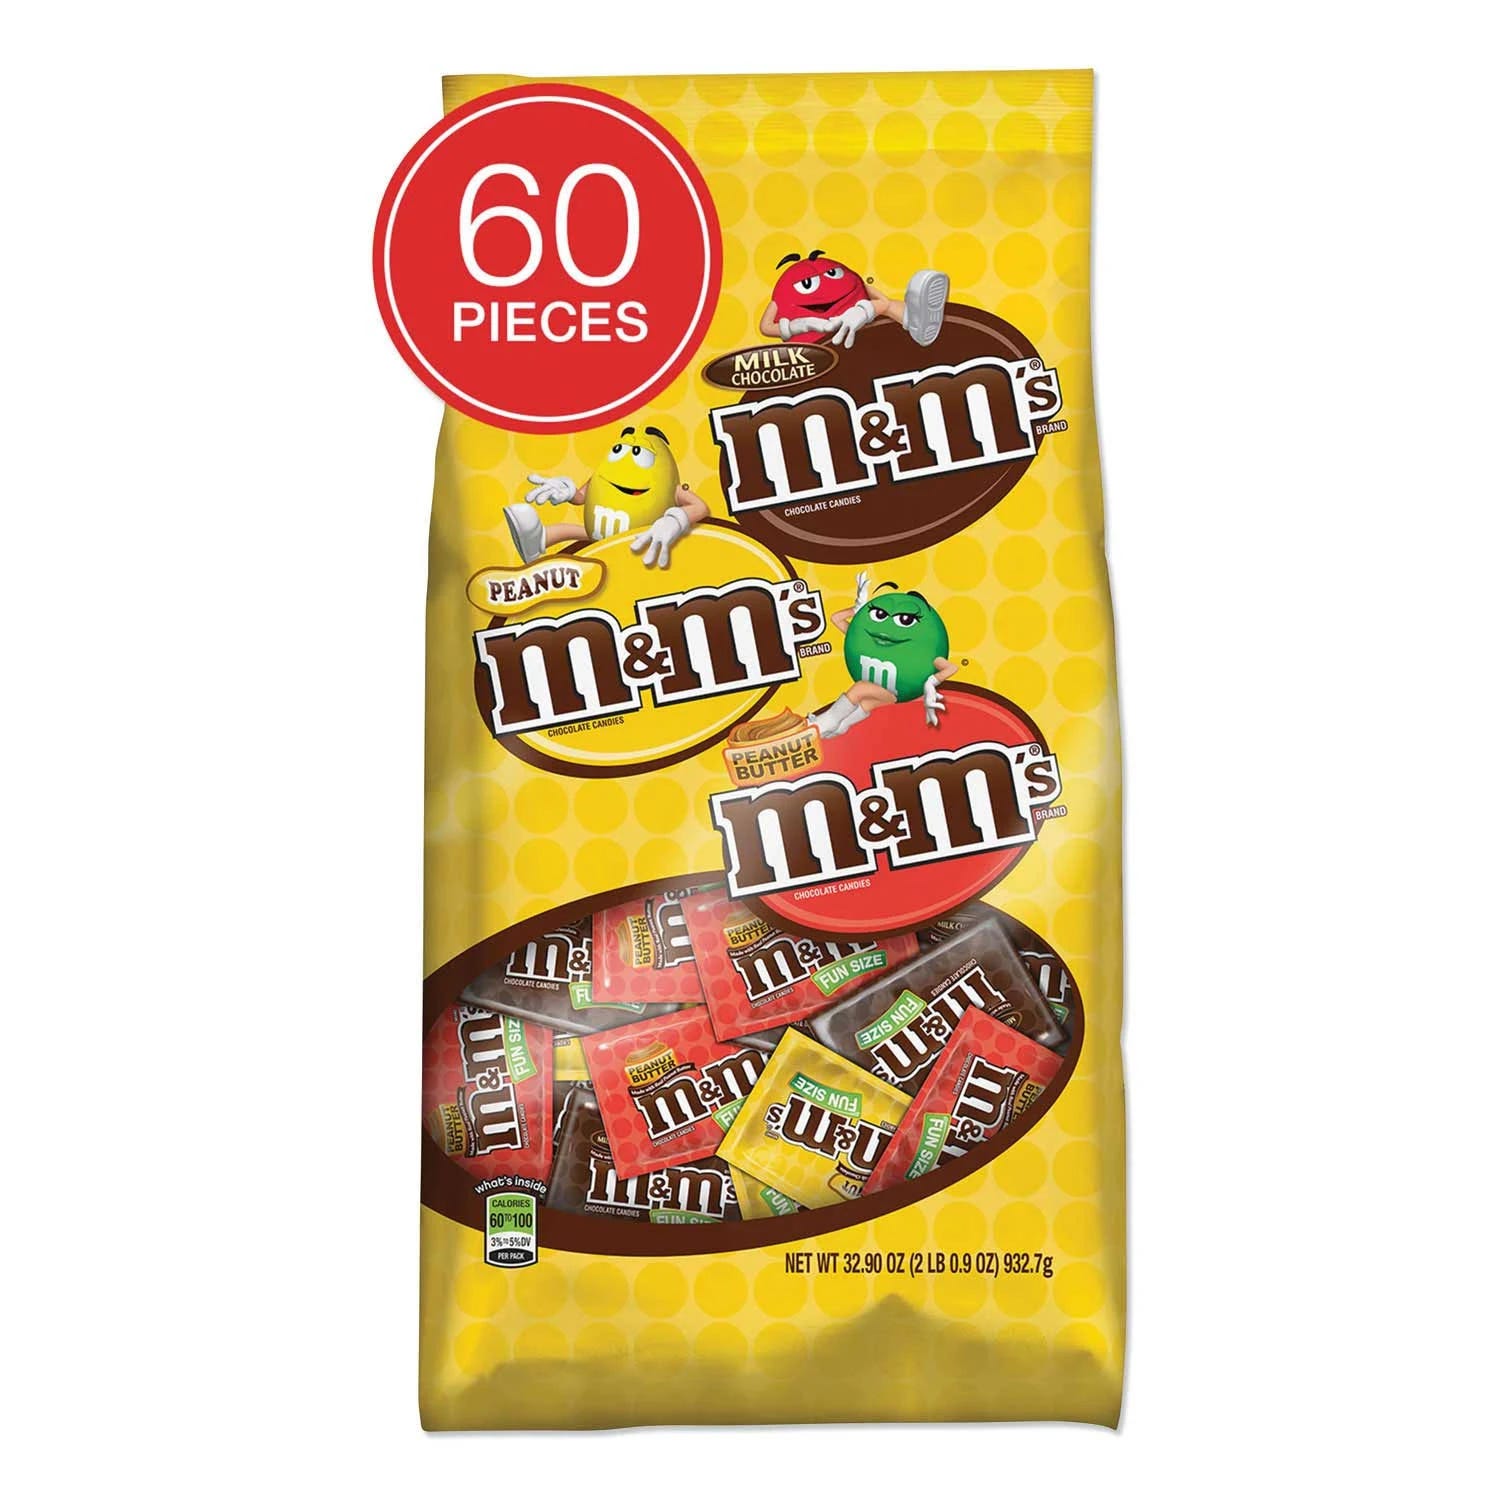 Classic Peanut Butter M&M's Chocolate Candies | Image